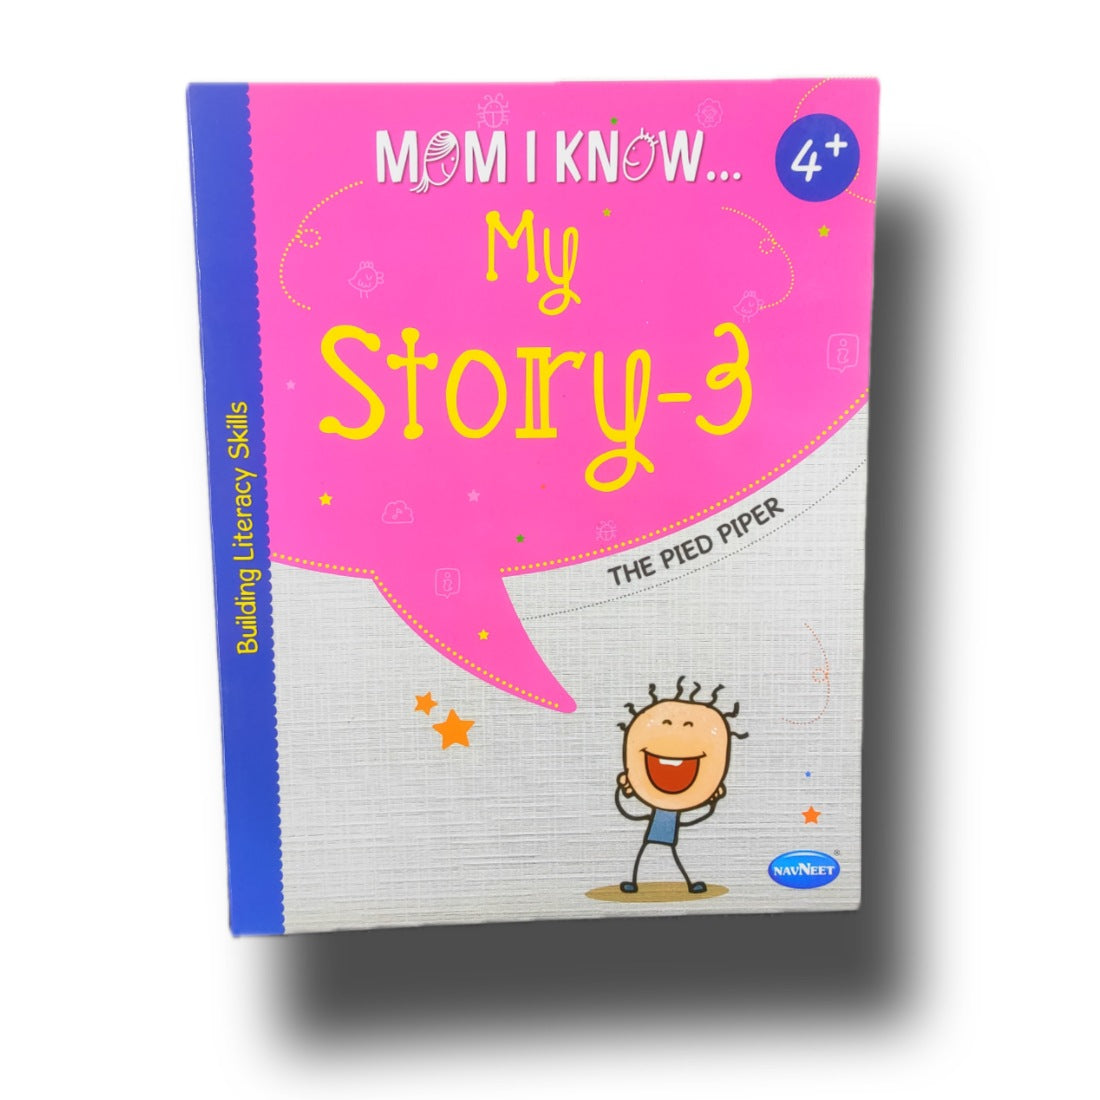 Fun　The　Story　Kids　Pied　for　Todd　I　–　Story-3　Yrs　Know　Piper　4+　Book　The　My　Mom　Basket®